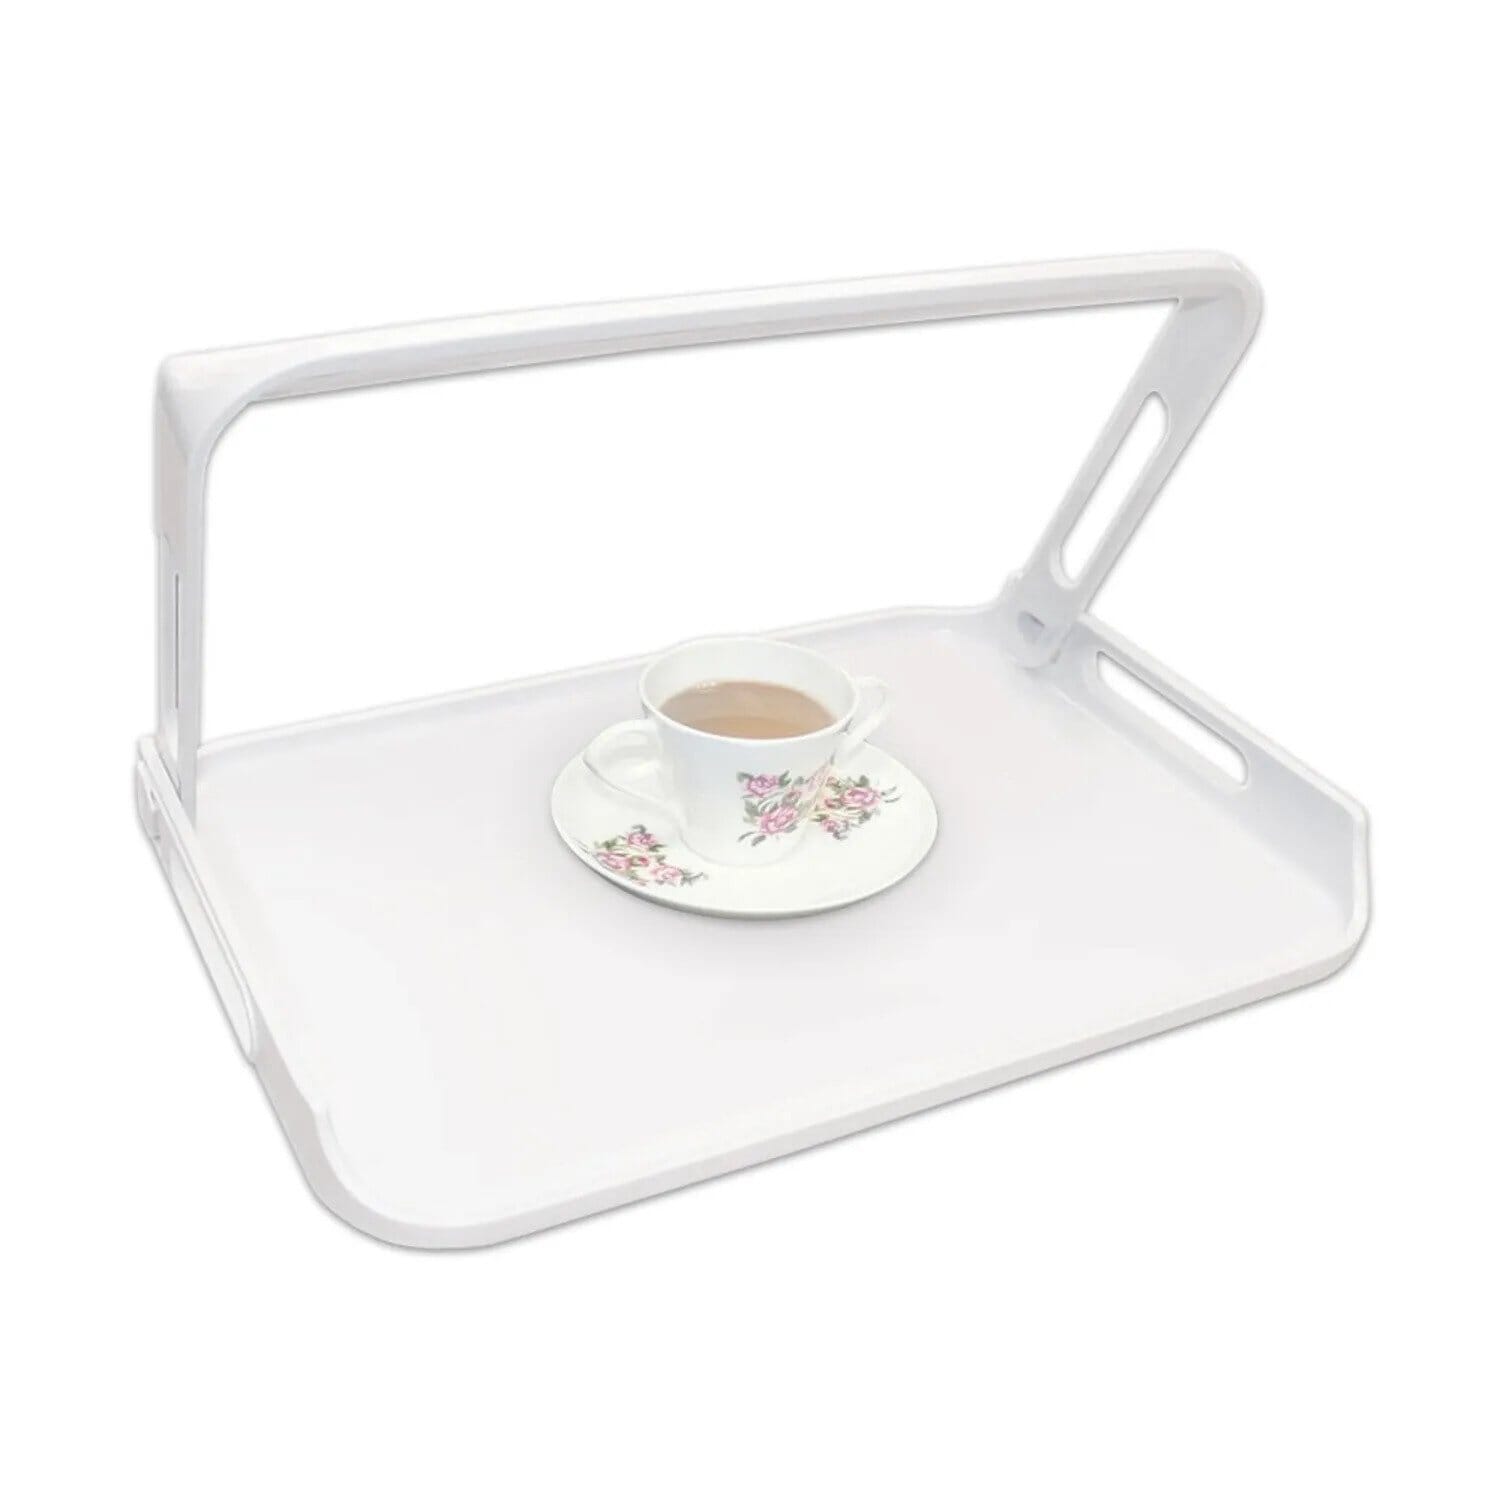 View One Hand Tray With Fold Down Handle  information